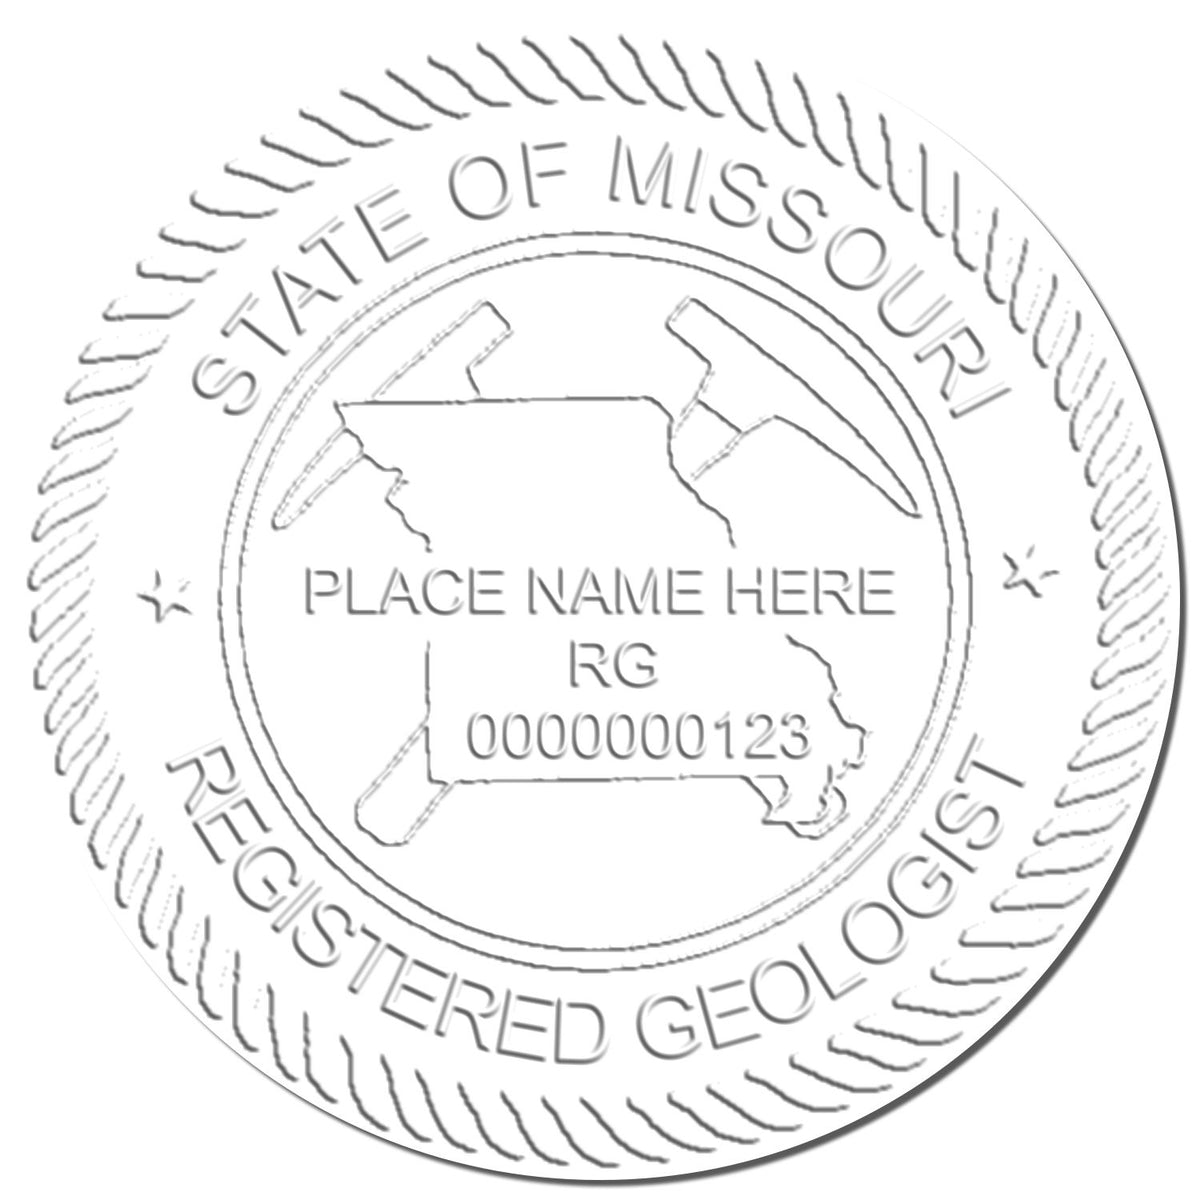 A photograph of the Hybrid Missouri Geologist Seal stamp impression reveals a vivid, professional image of the on paper.